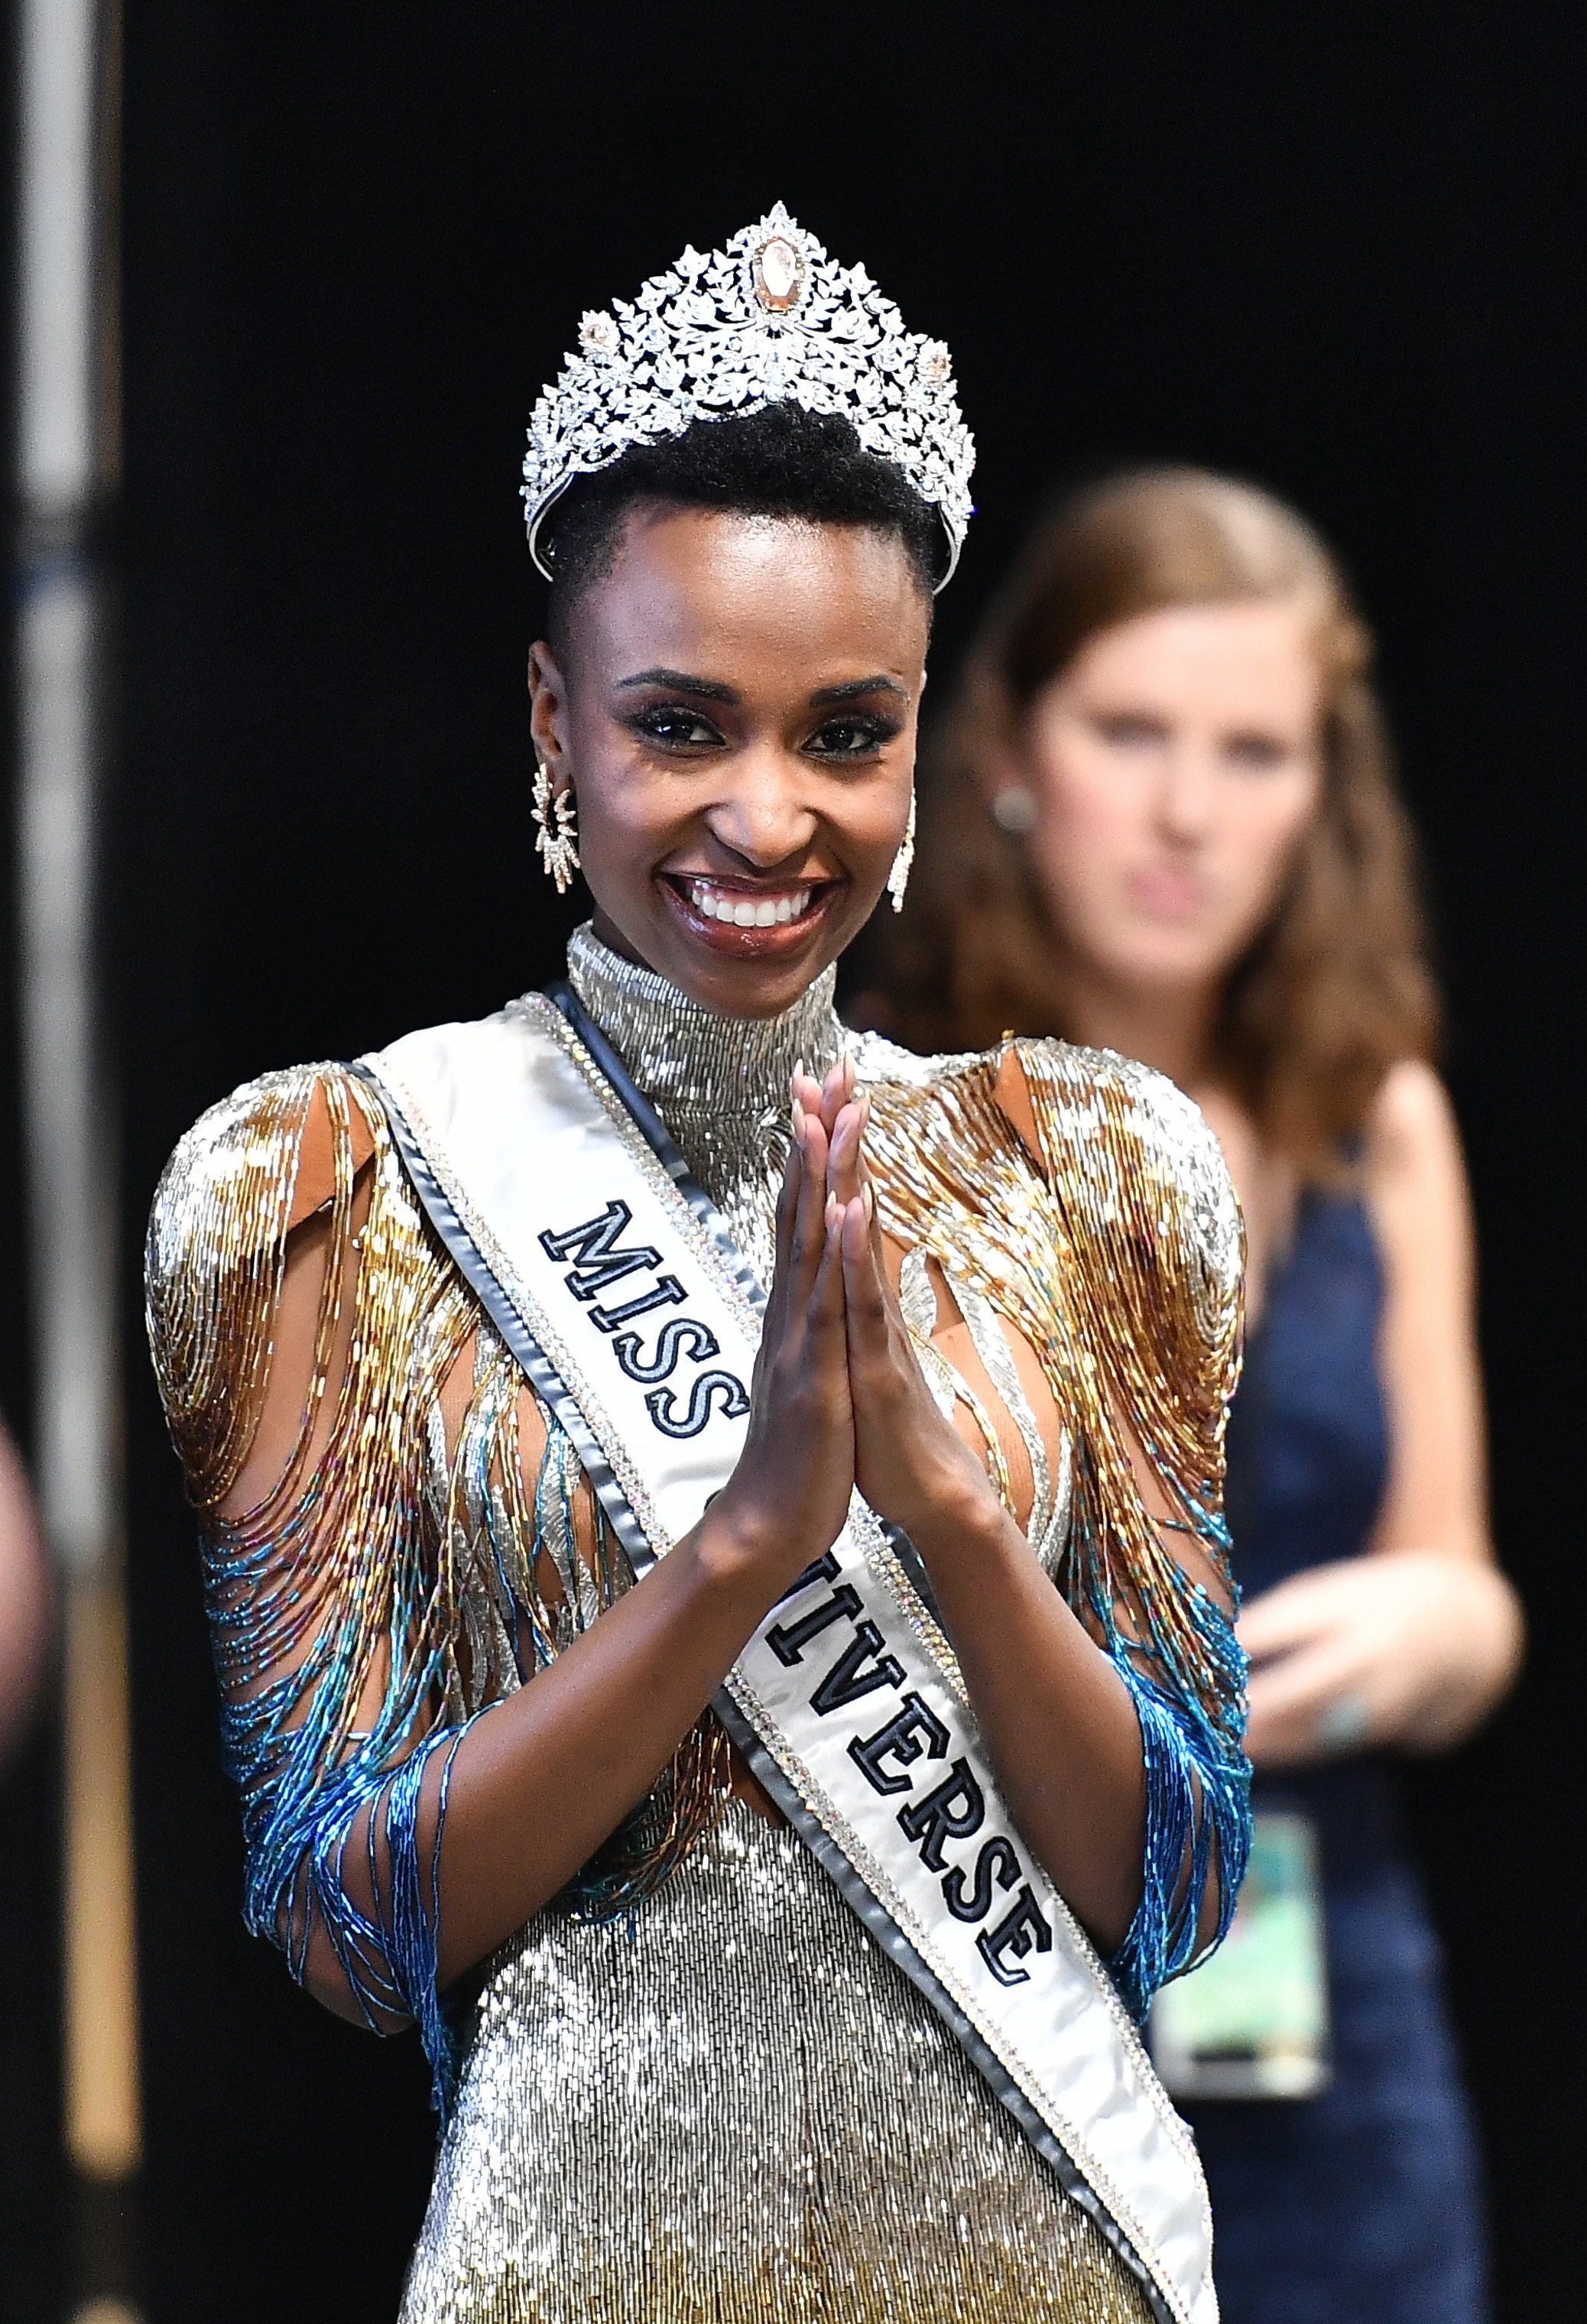 Zozibini Tunzi during the 2019 Miss Universe pageant after winning the grand prize on December 8, 2019. | Photo: Getty Images